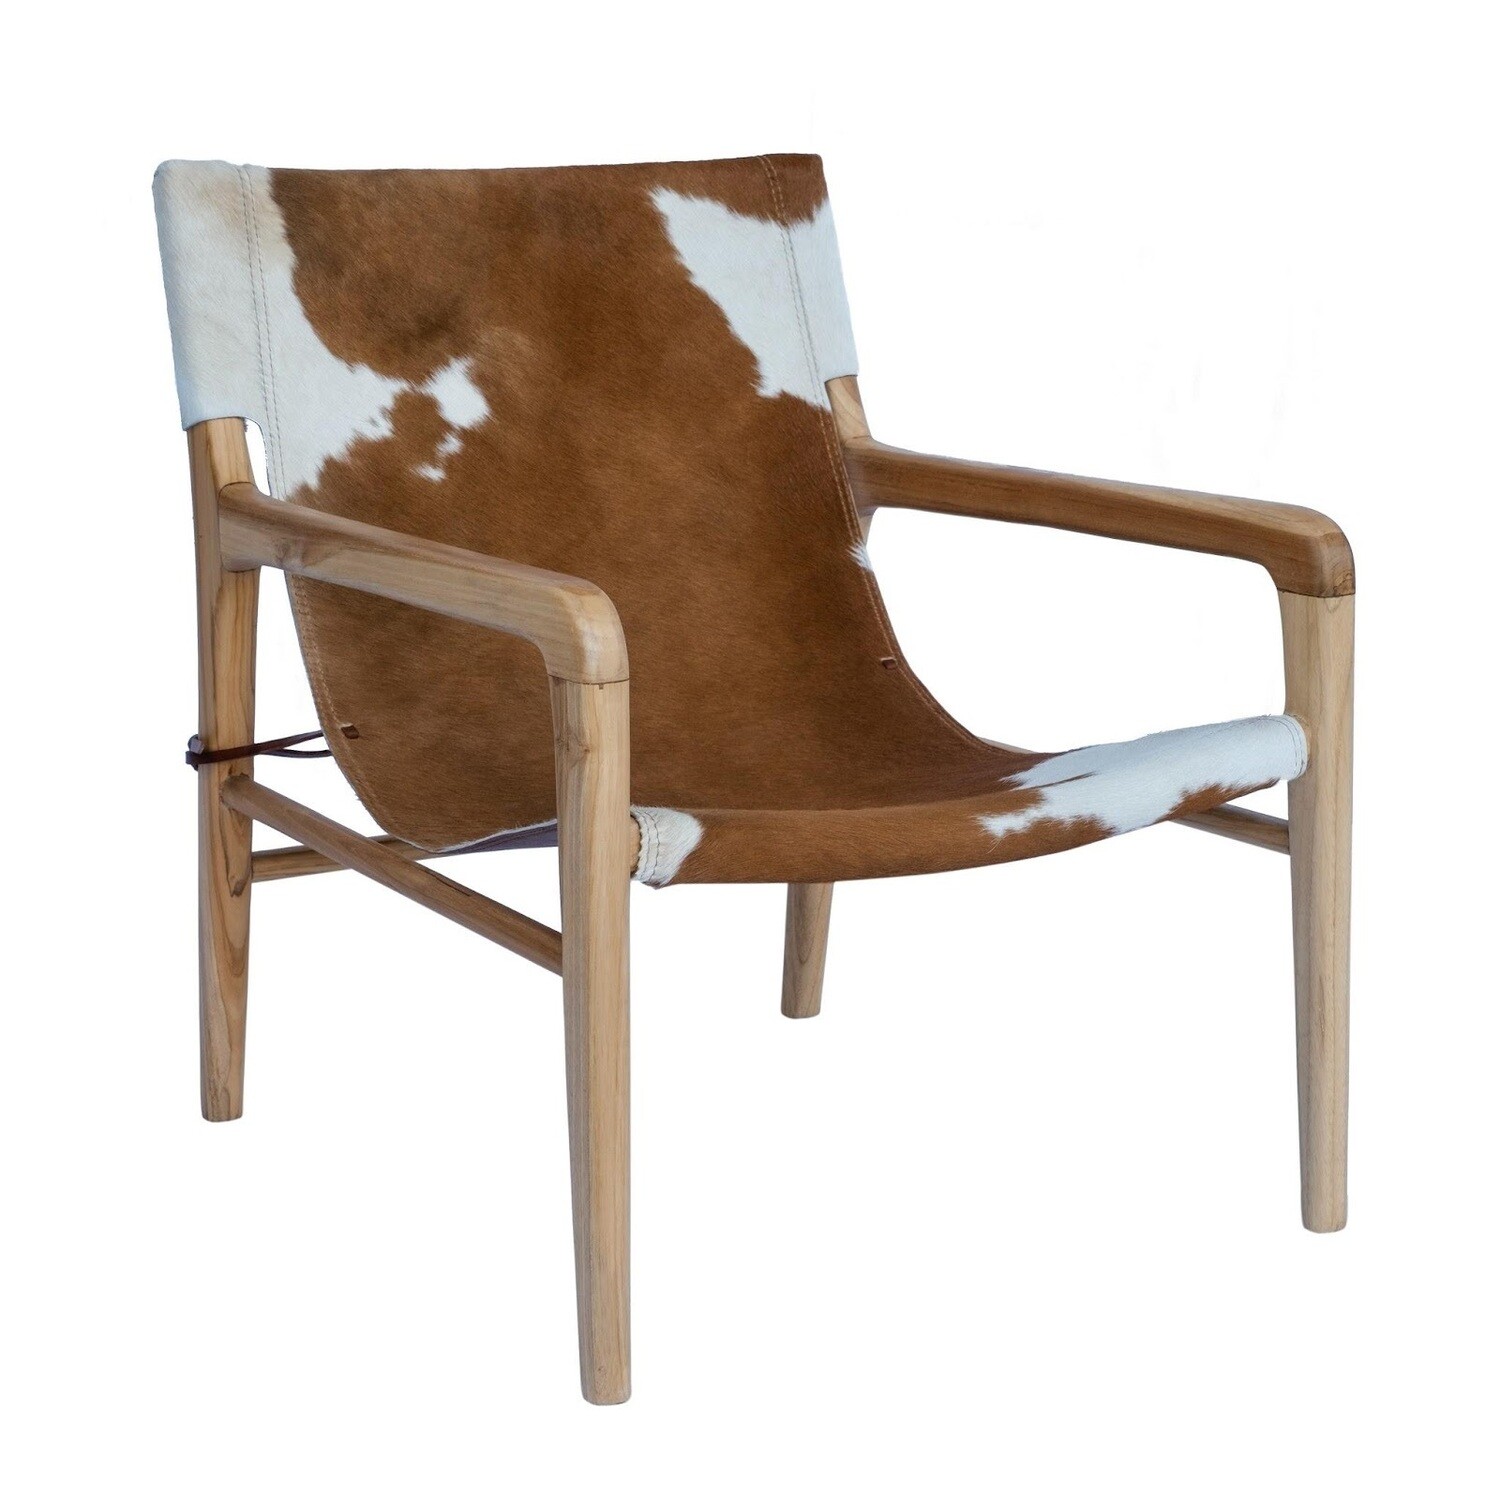 Leather Occasional Chair 1 (Tan)